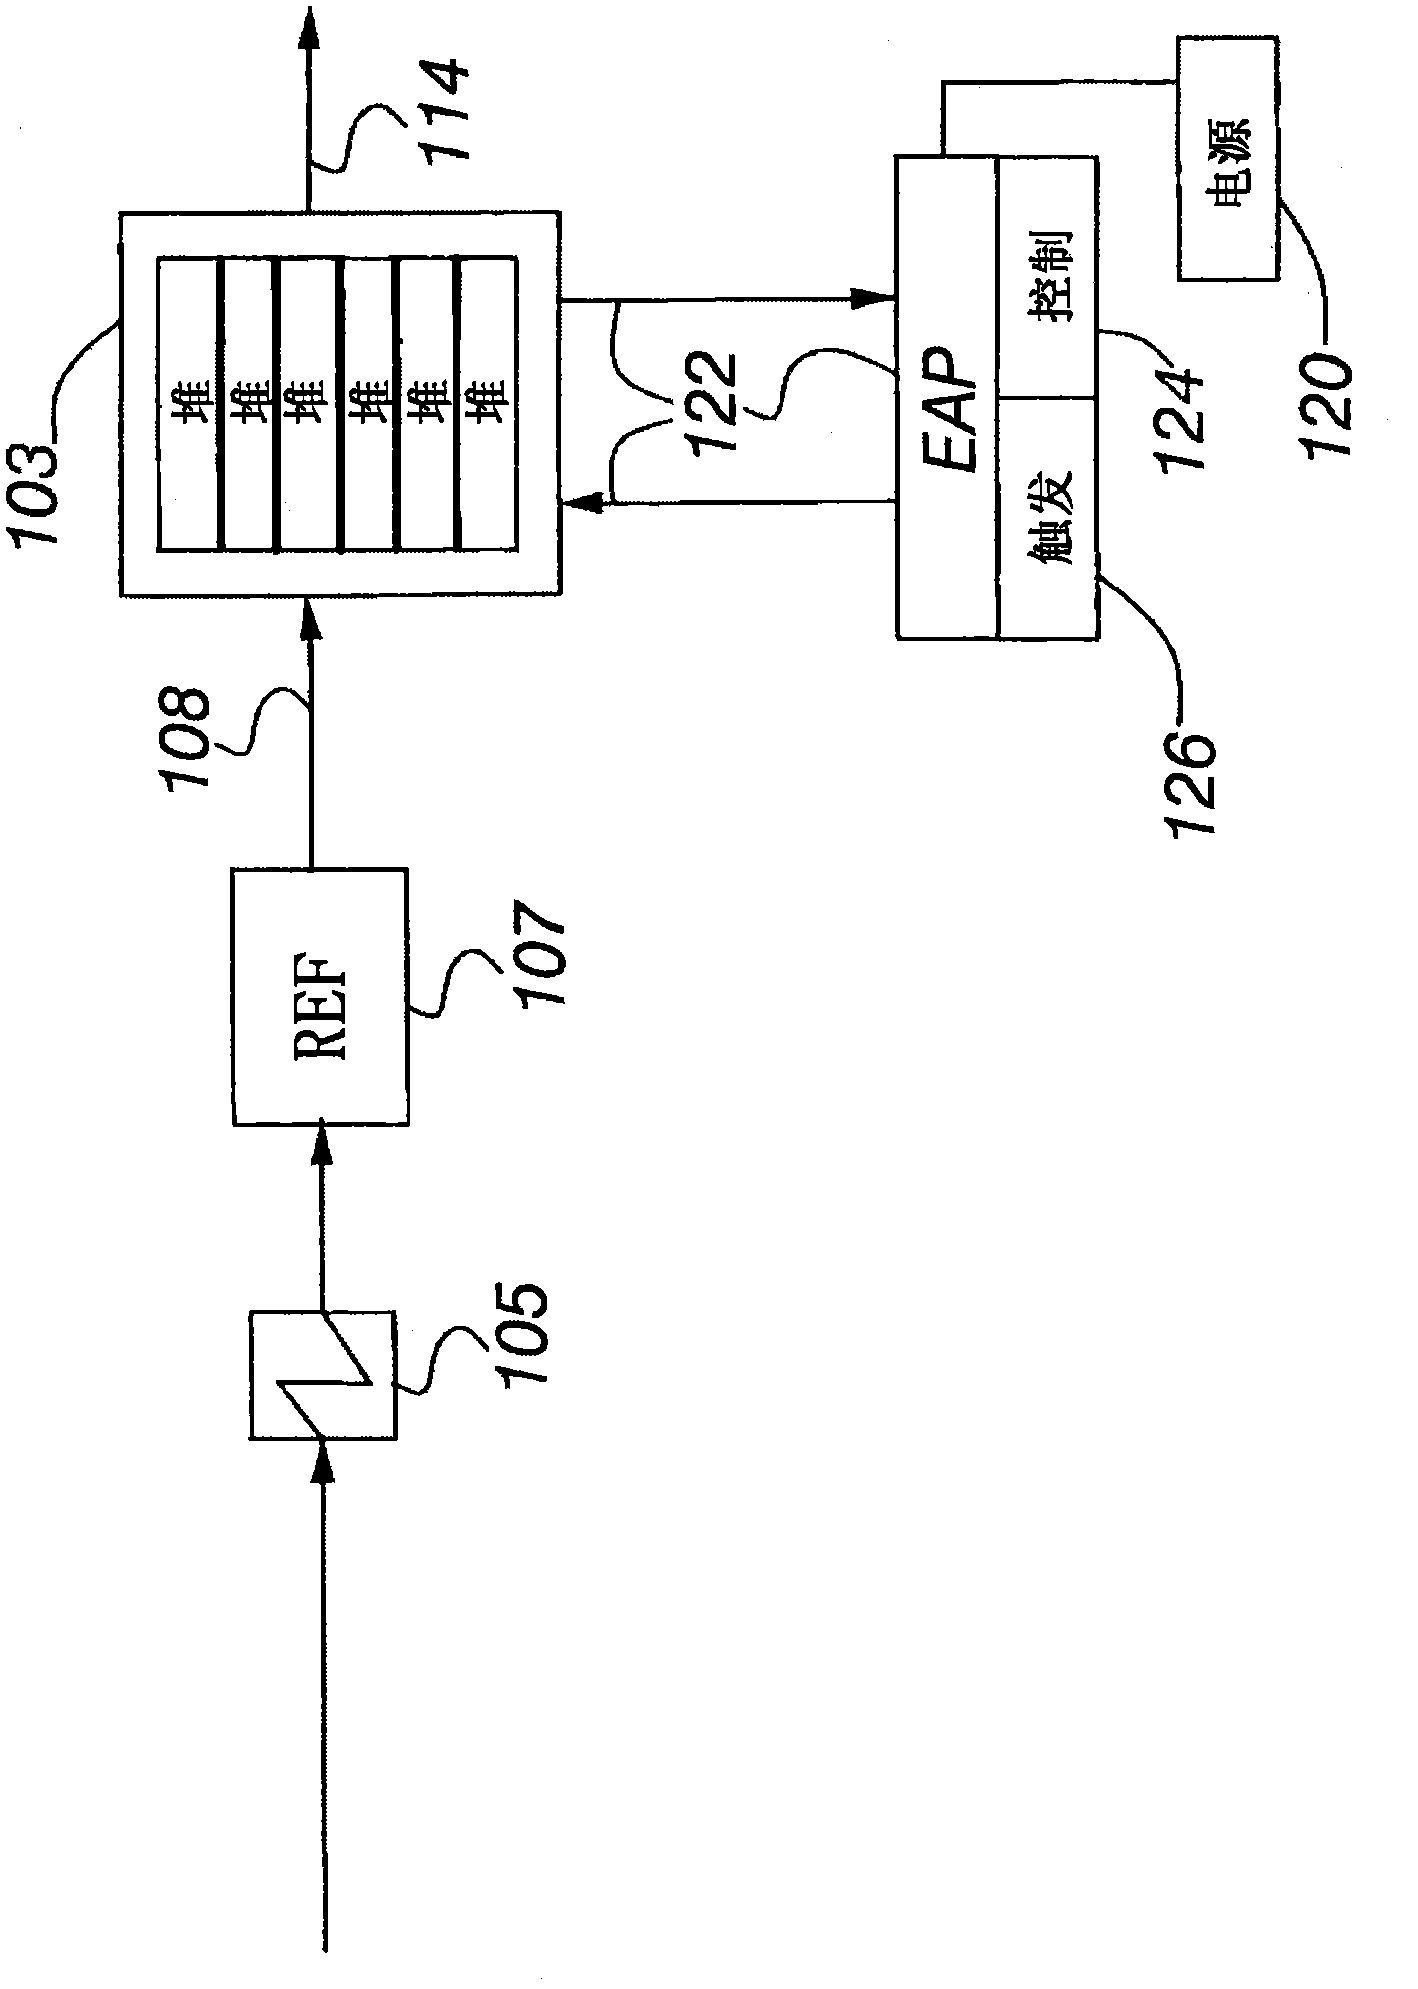 Method and arrangement for minimizing need for safety gases